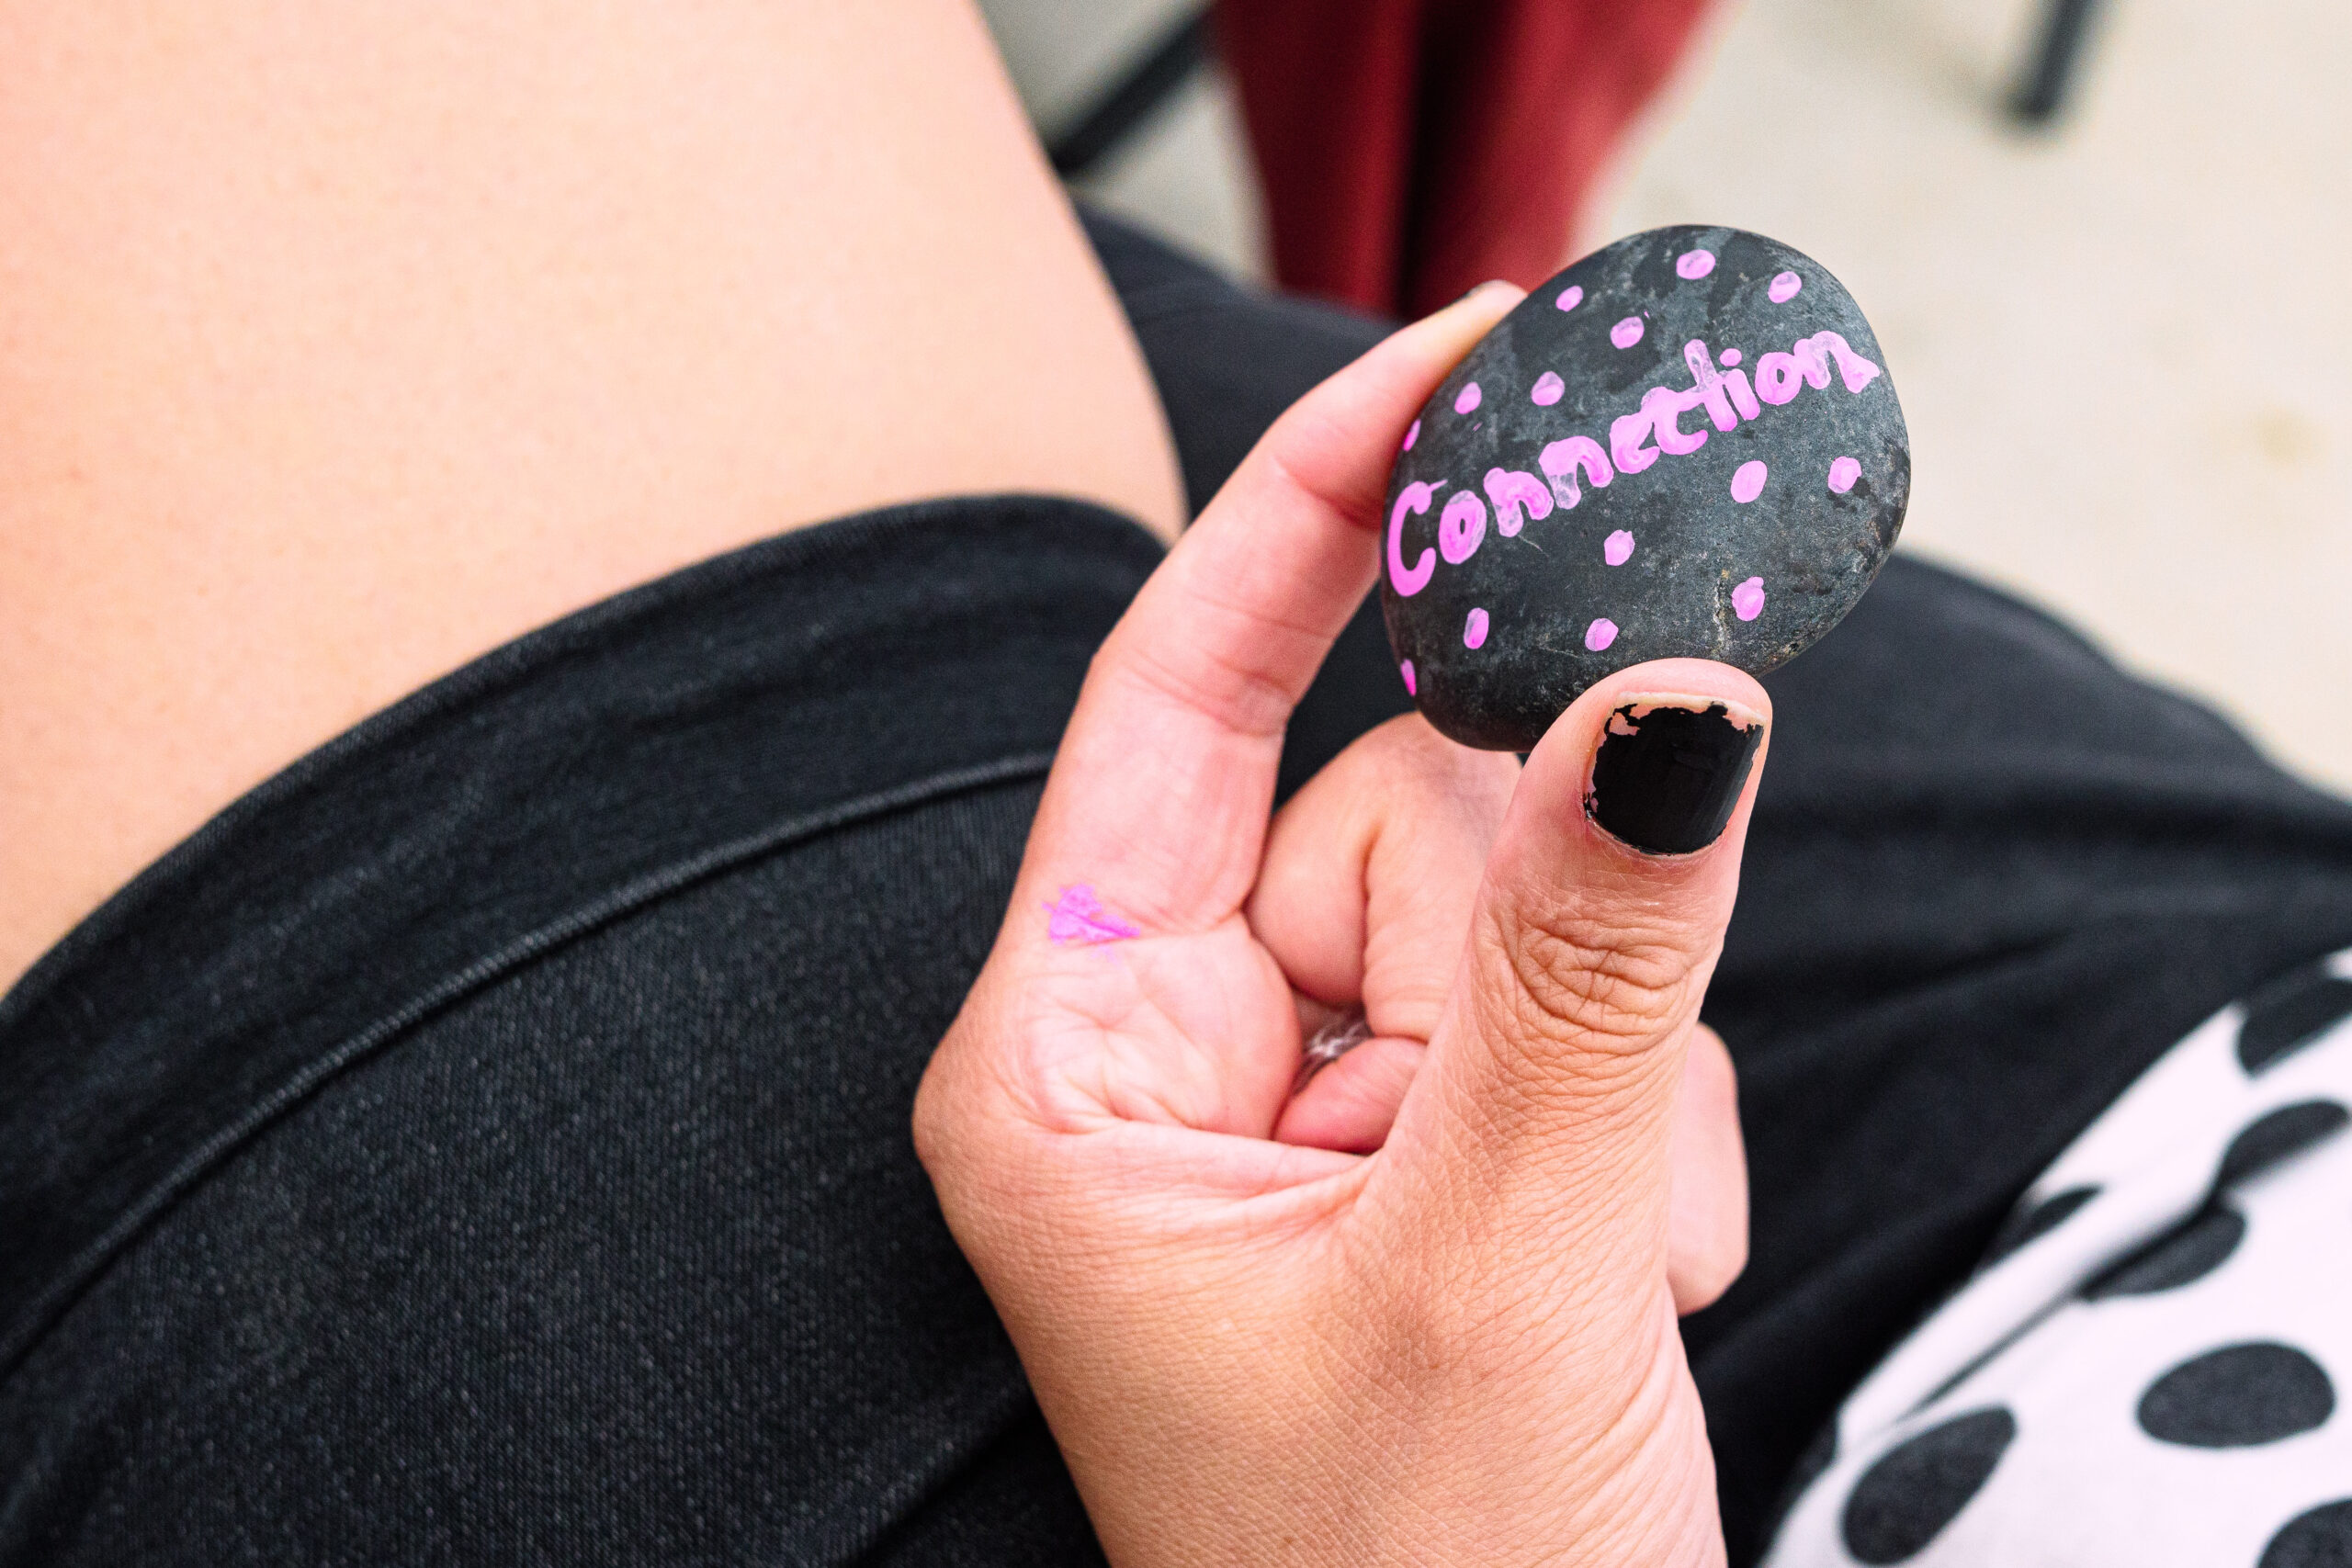 a light skin person in black shorts and a white shirt with black polkadots sits, holding a rock between their thumb and fore finger that has the word "connection" written on it in pink ink. their face is out of view, as the camera is close up and focused on the rock.